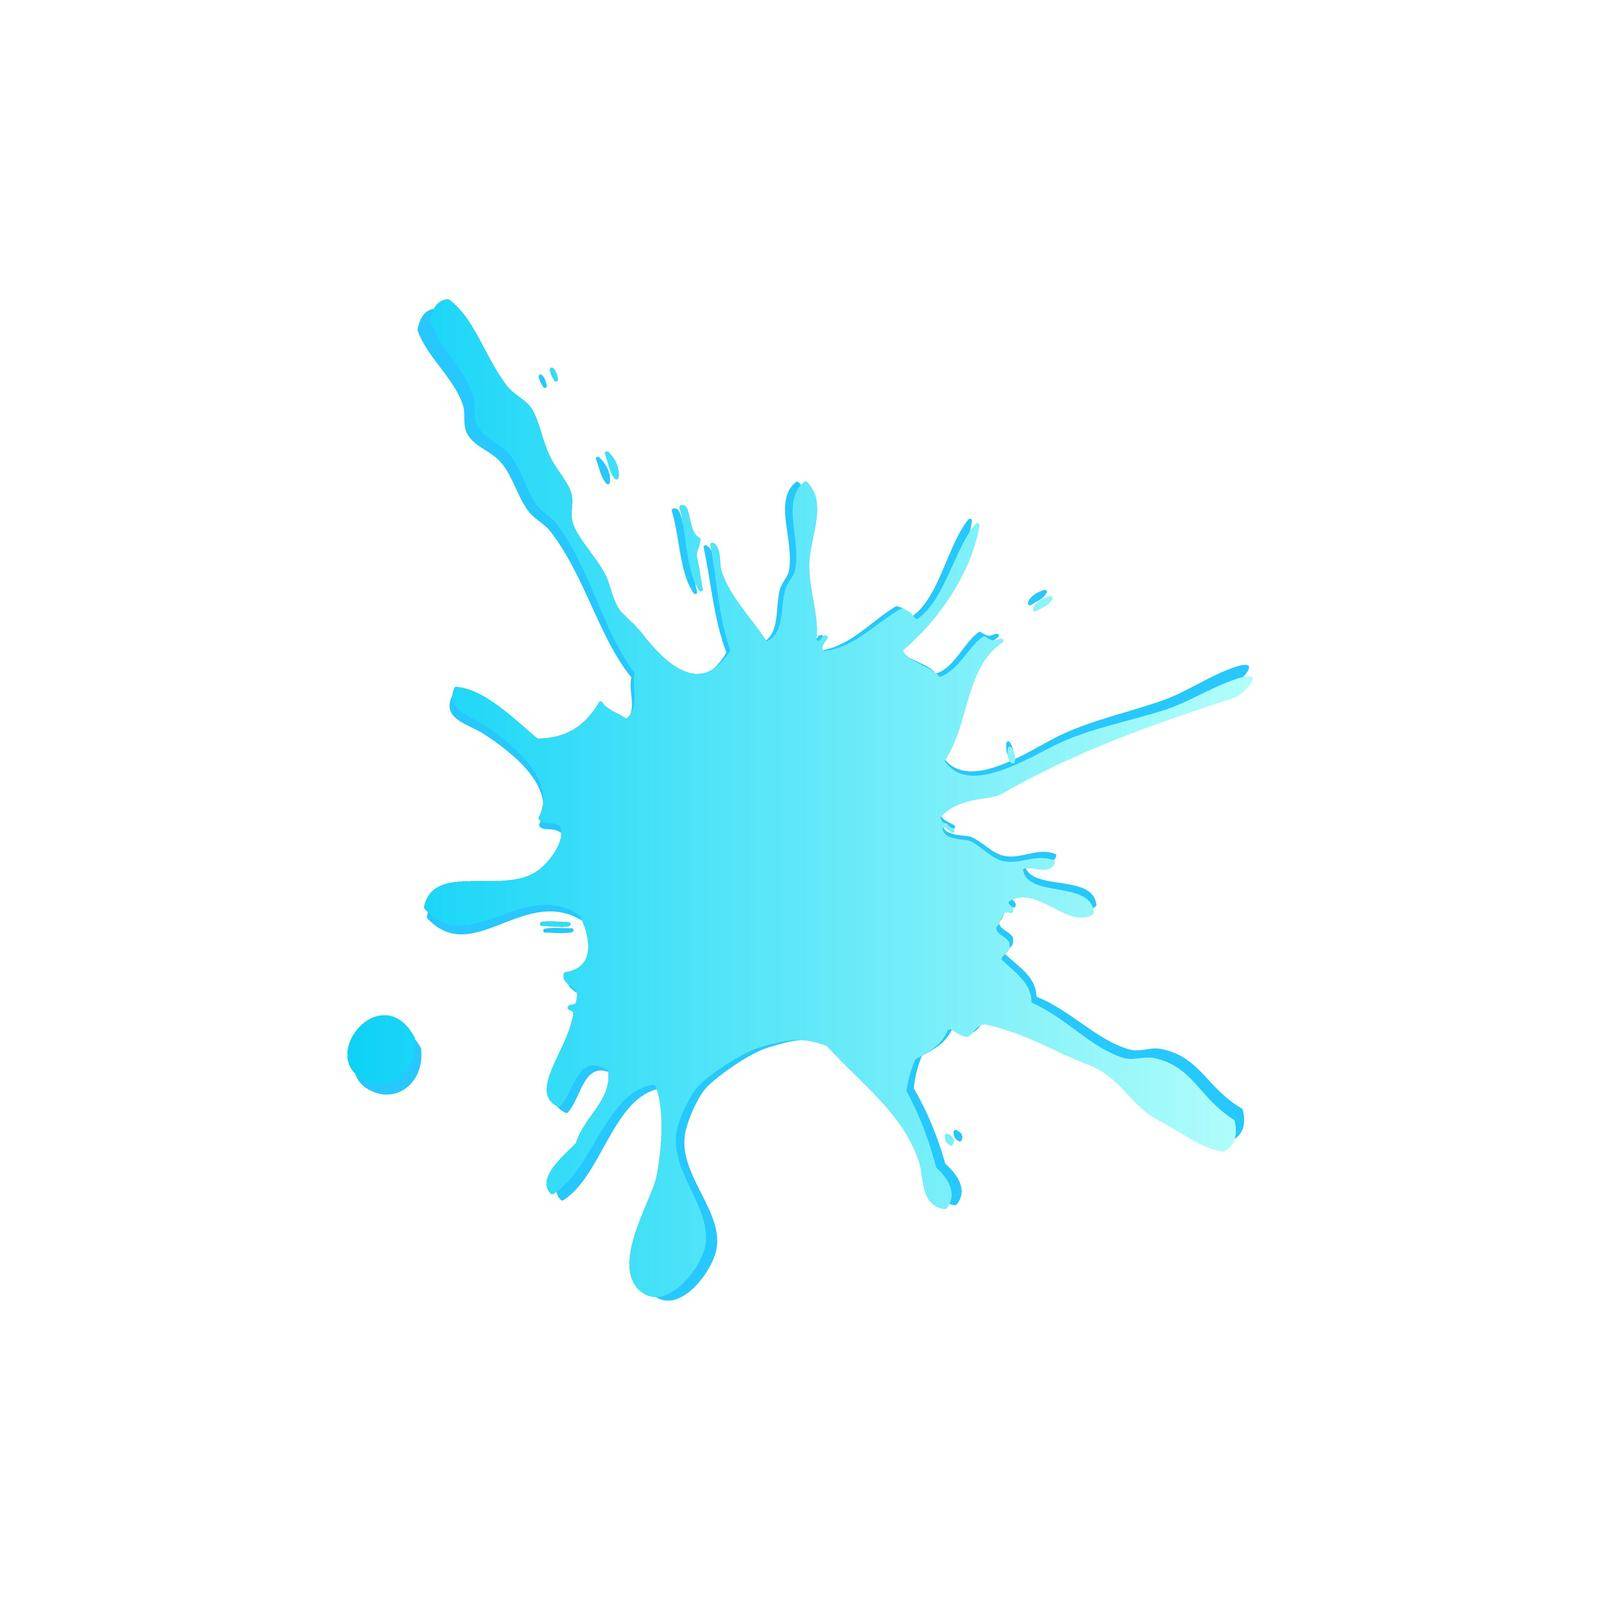 Splash of water or blue liquid on a transparent background. Vector illustration EPS 10 by TopRated